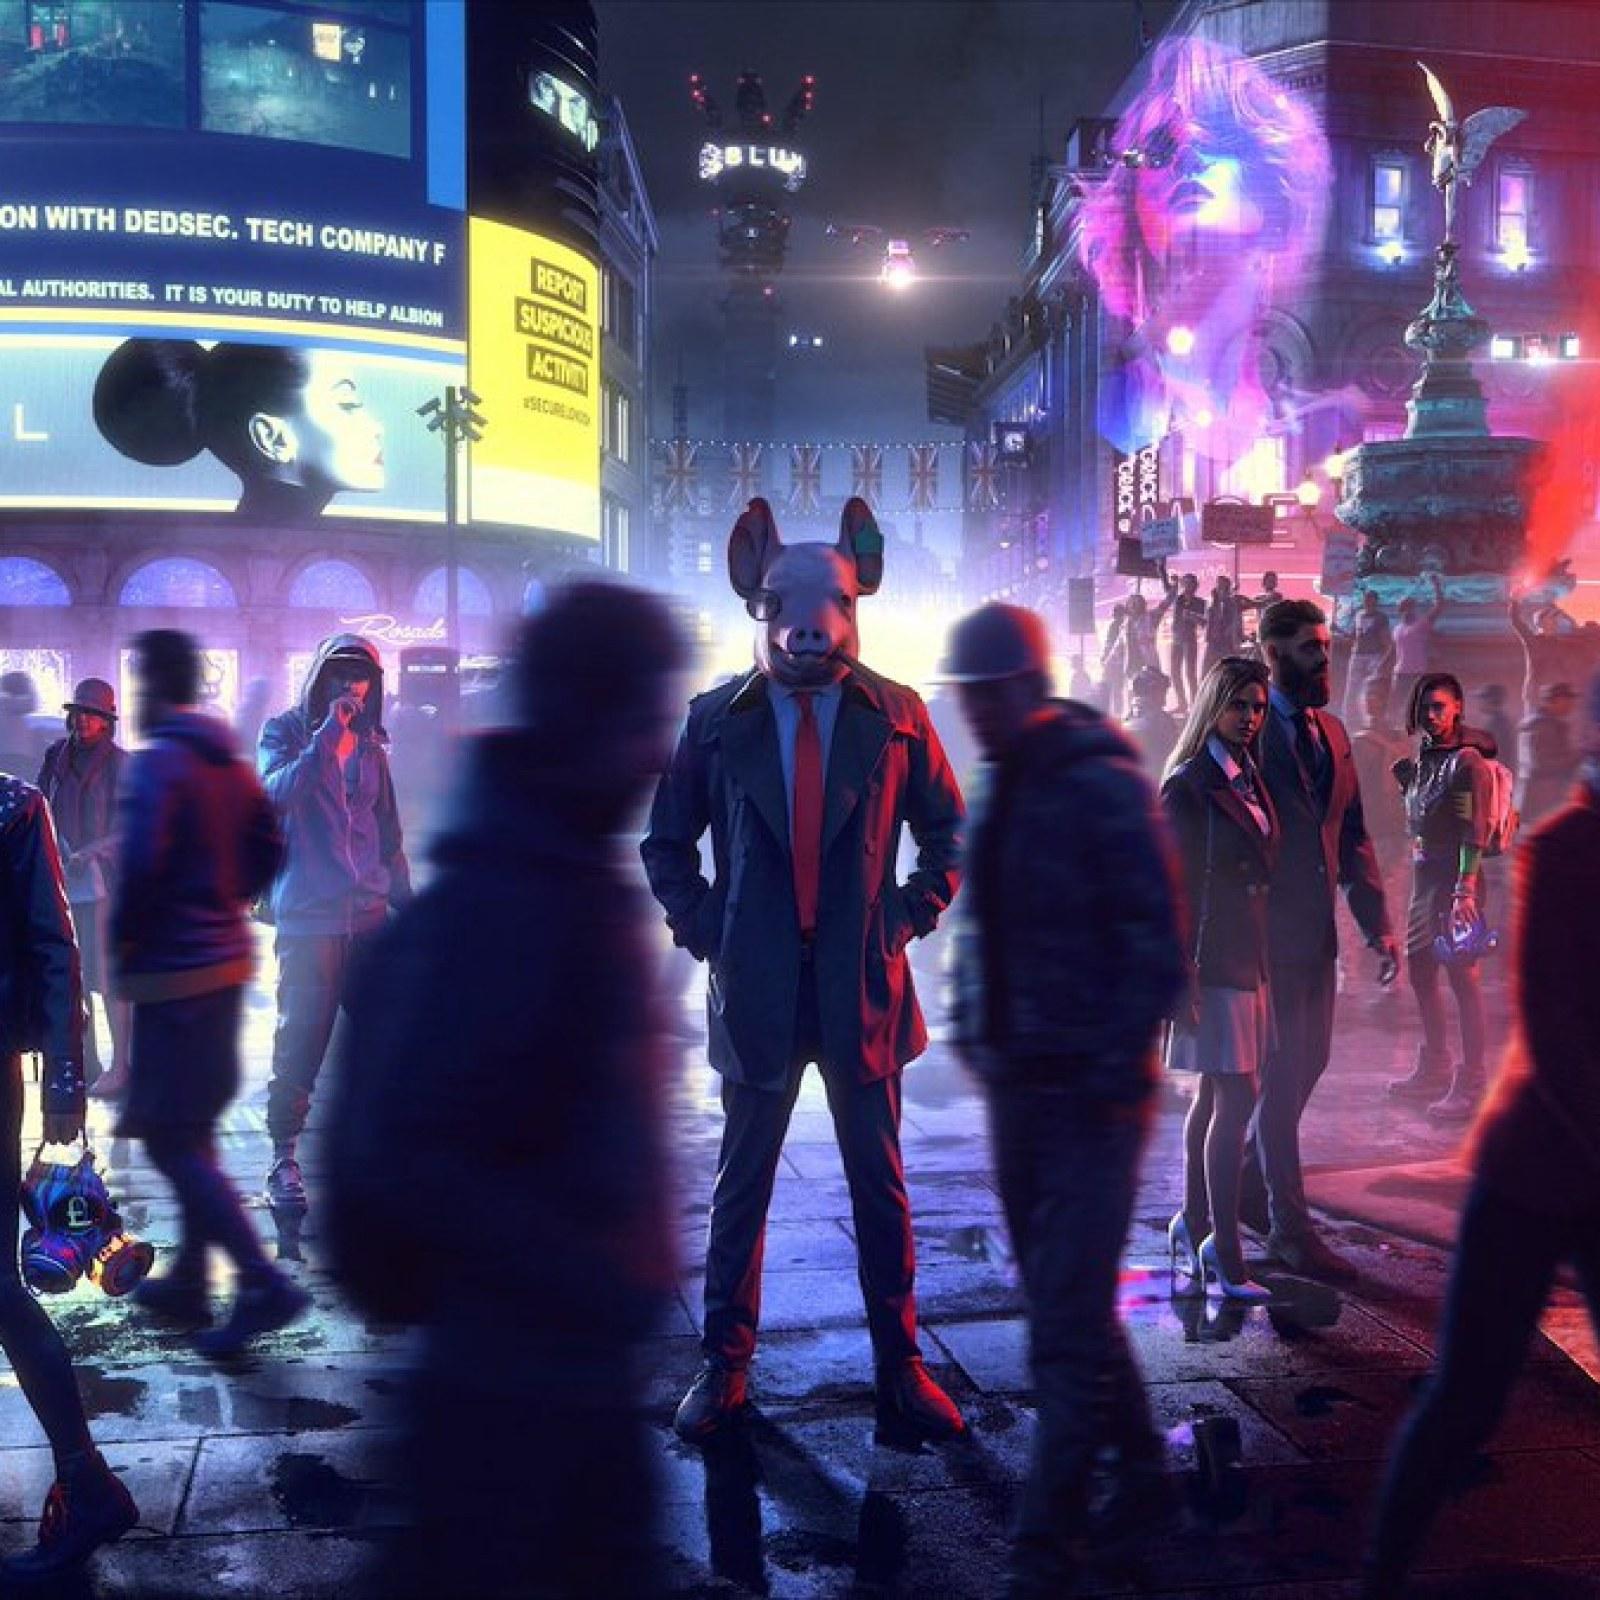 Watch Dogs Legion' Allows Players to Recruit Anyone to Join